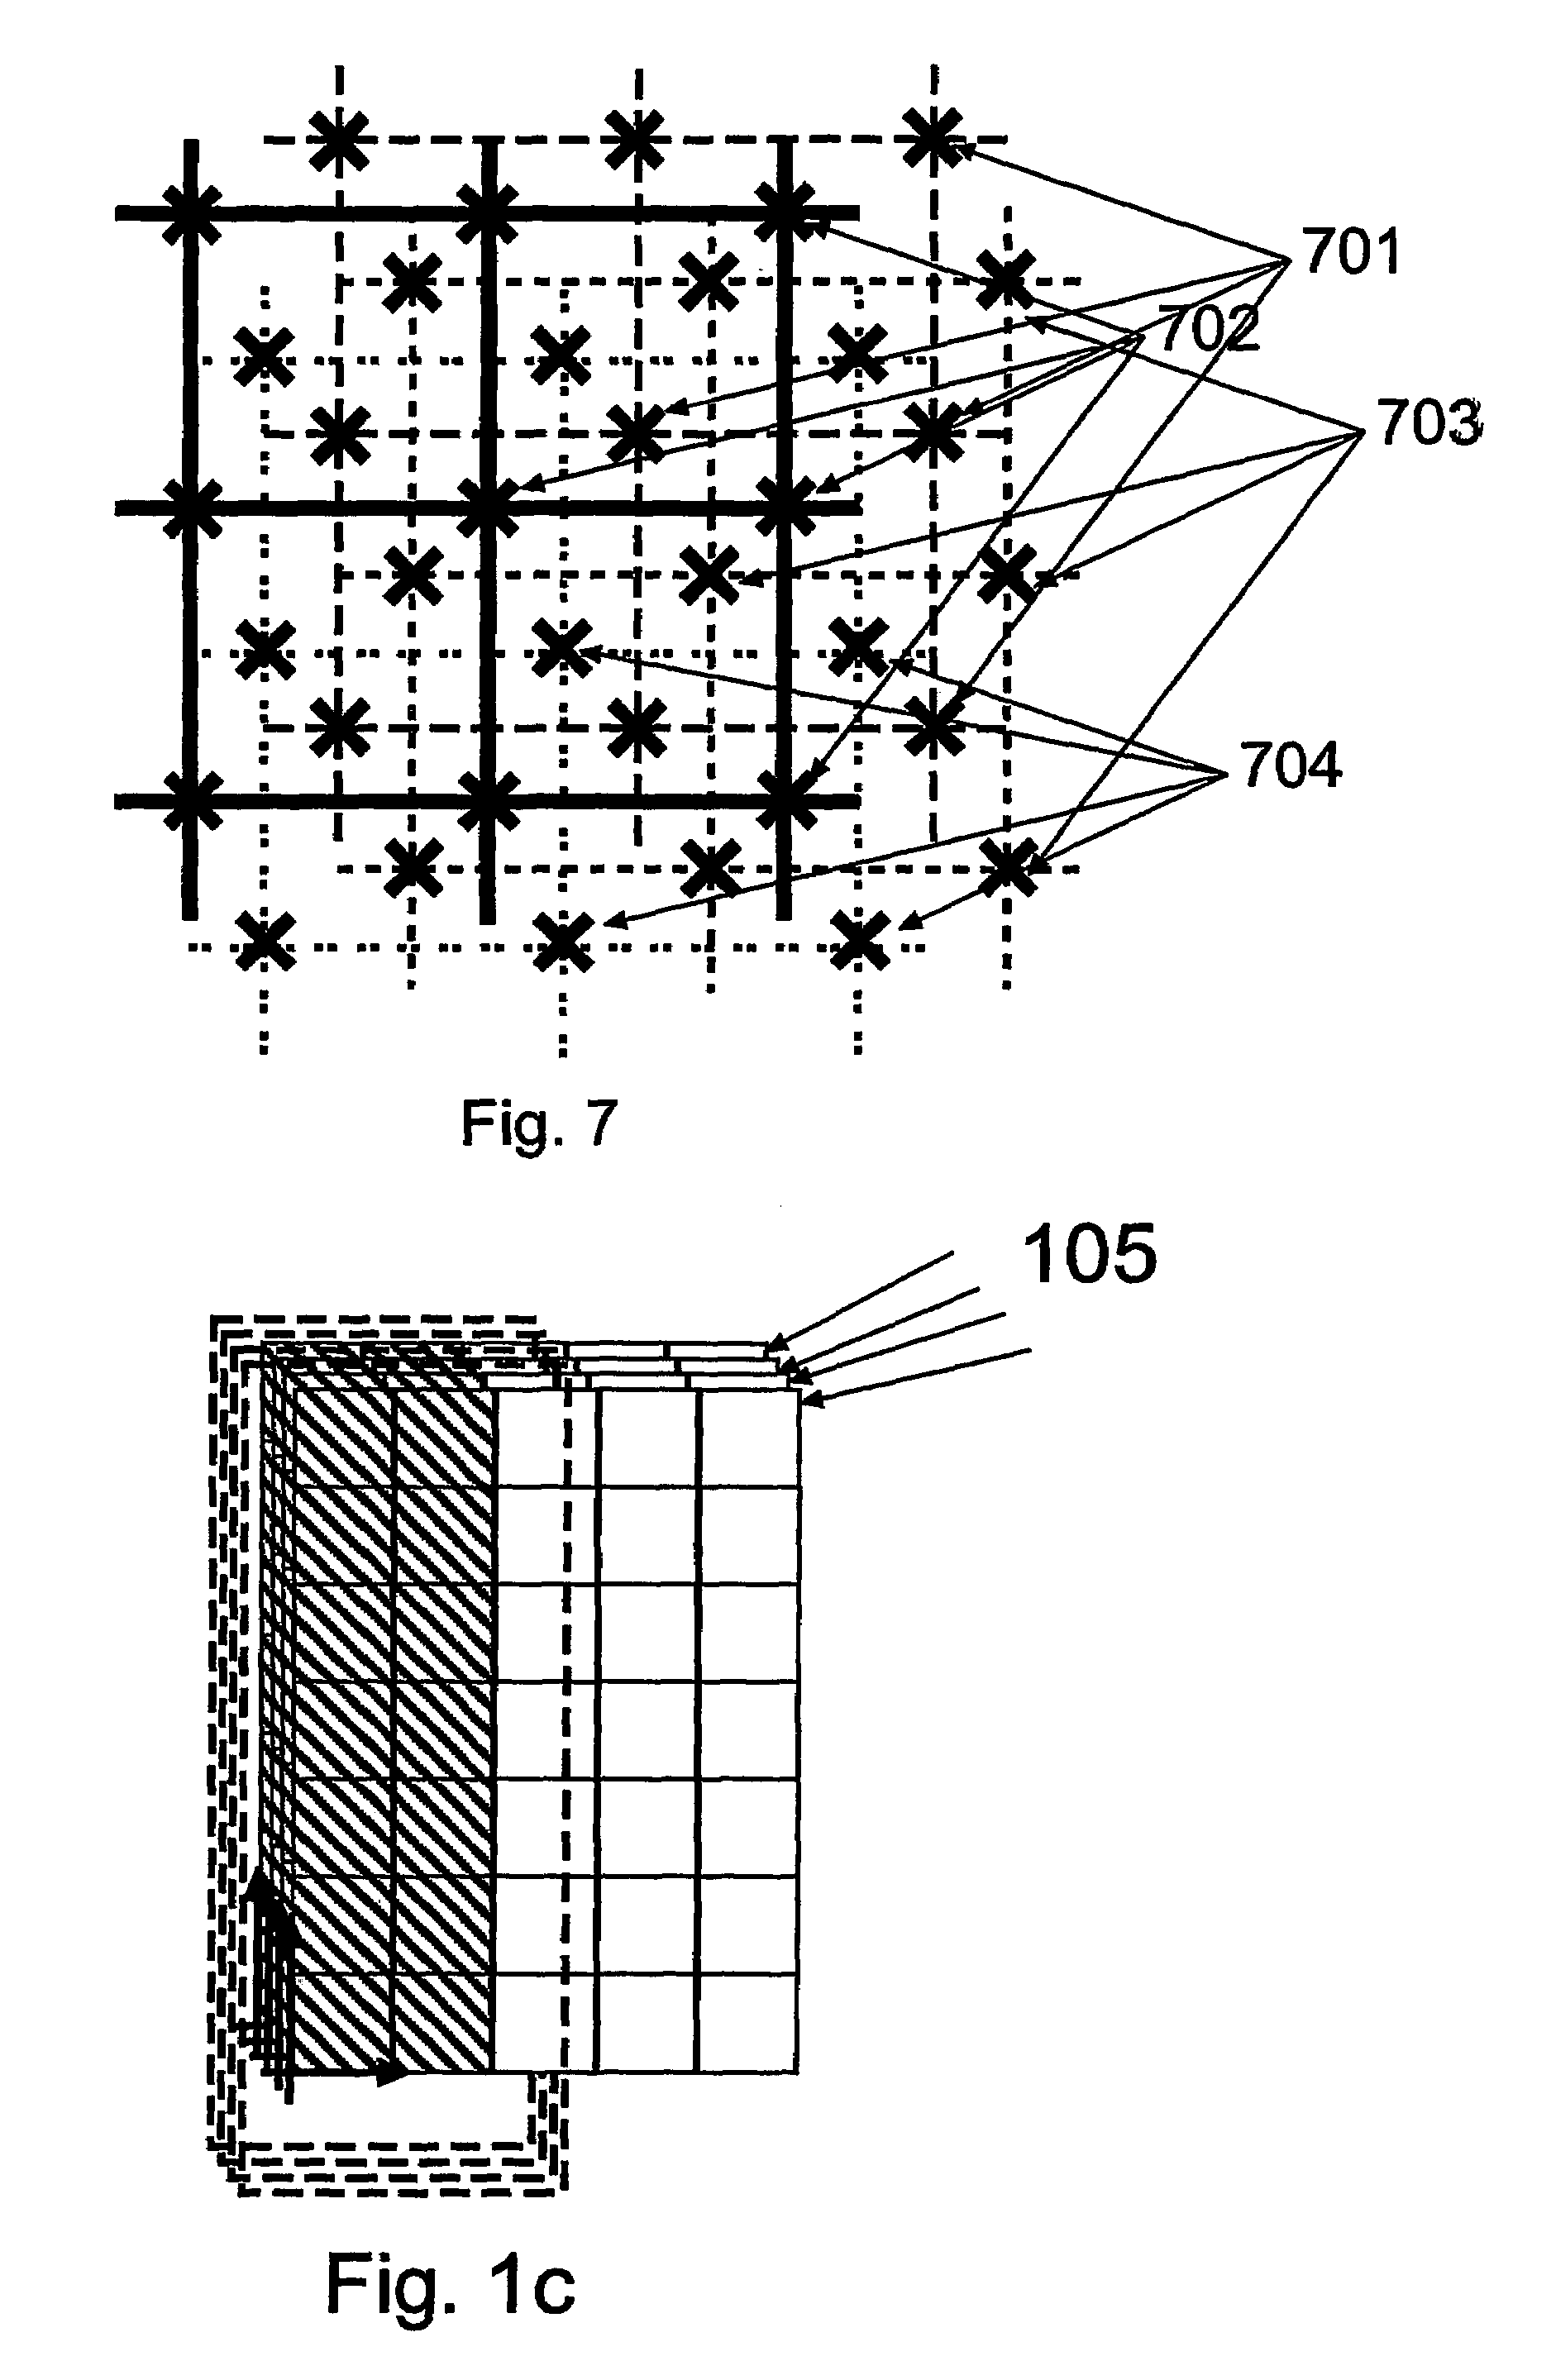 Method and apparatus for patterning a workpiece